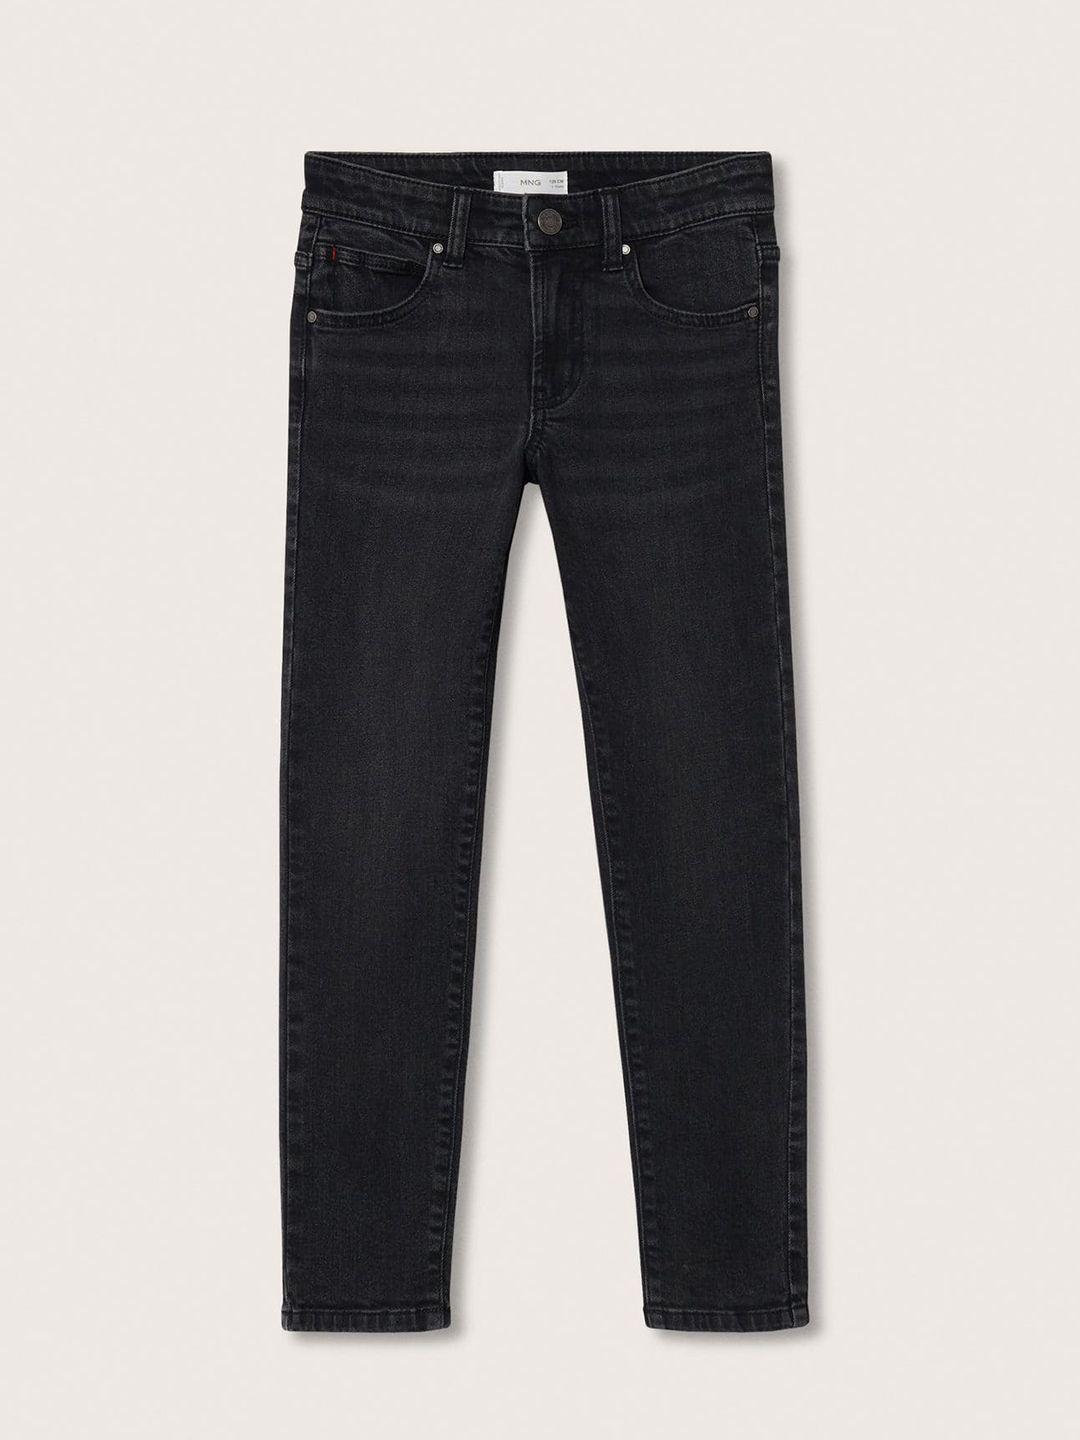 mango-kids-boys-black-solid-sustainable-stretchable-light-fade-slim-fit-jeans